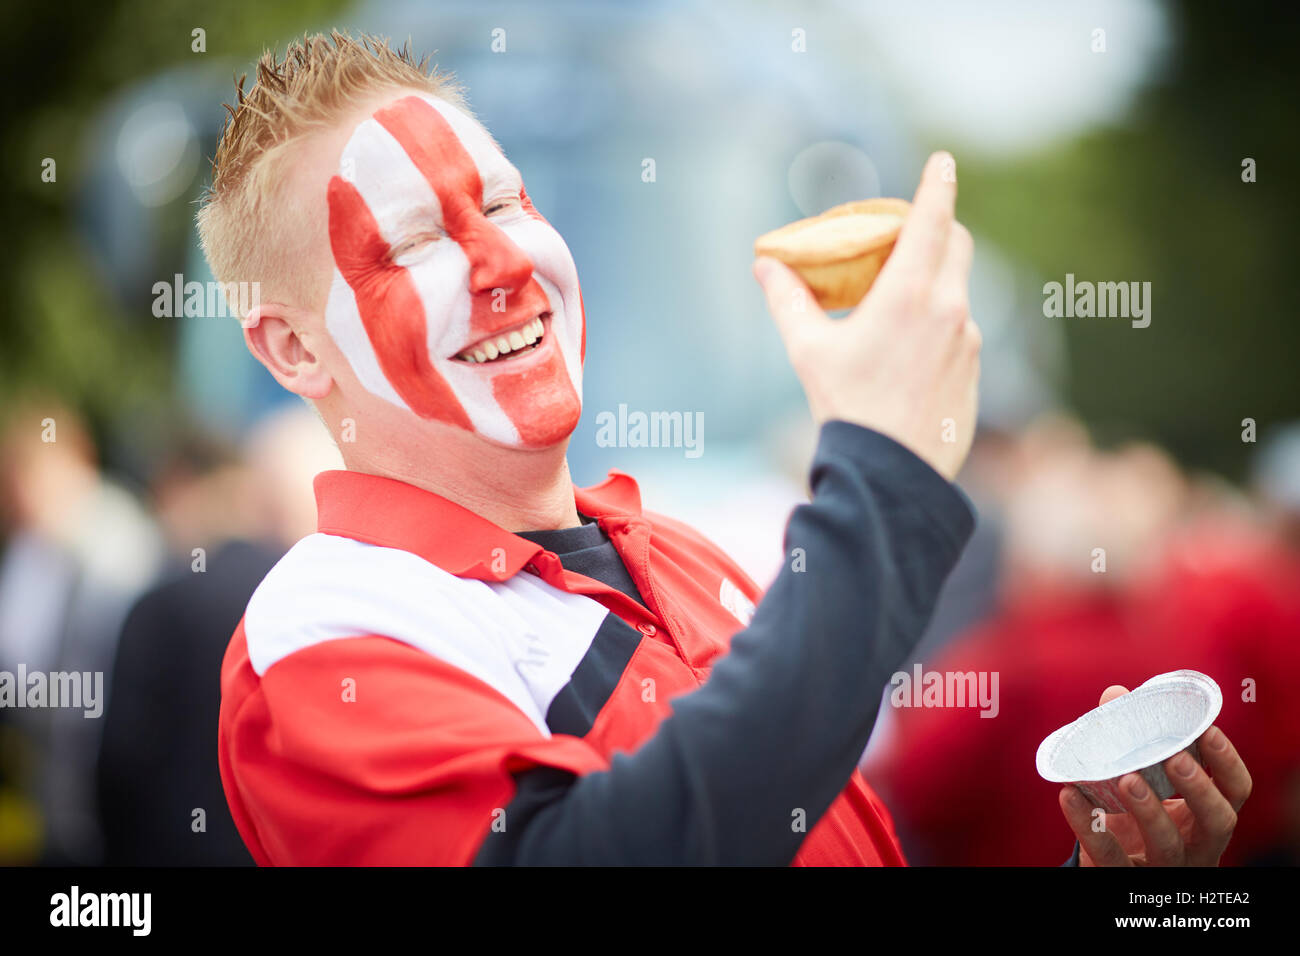 Football fan eating pies Hollands   Accrington Stanly FC fans match game eating pies happy laughing Young kids children youngste Stock Photo